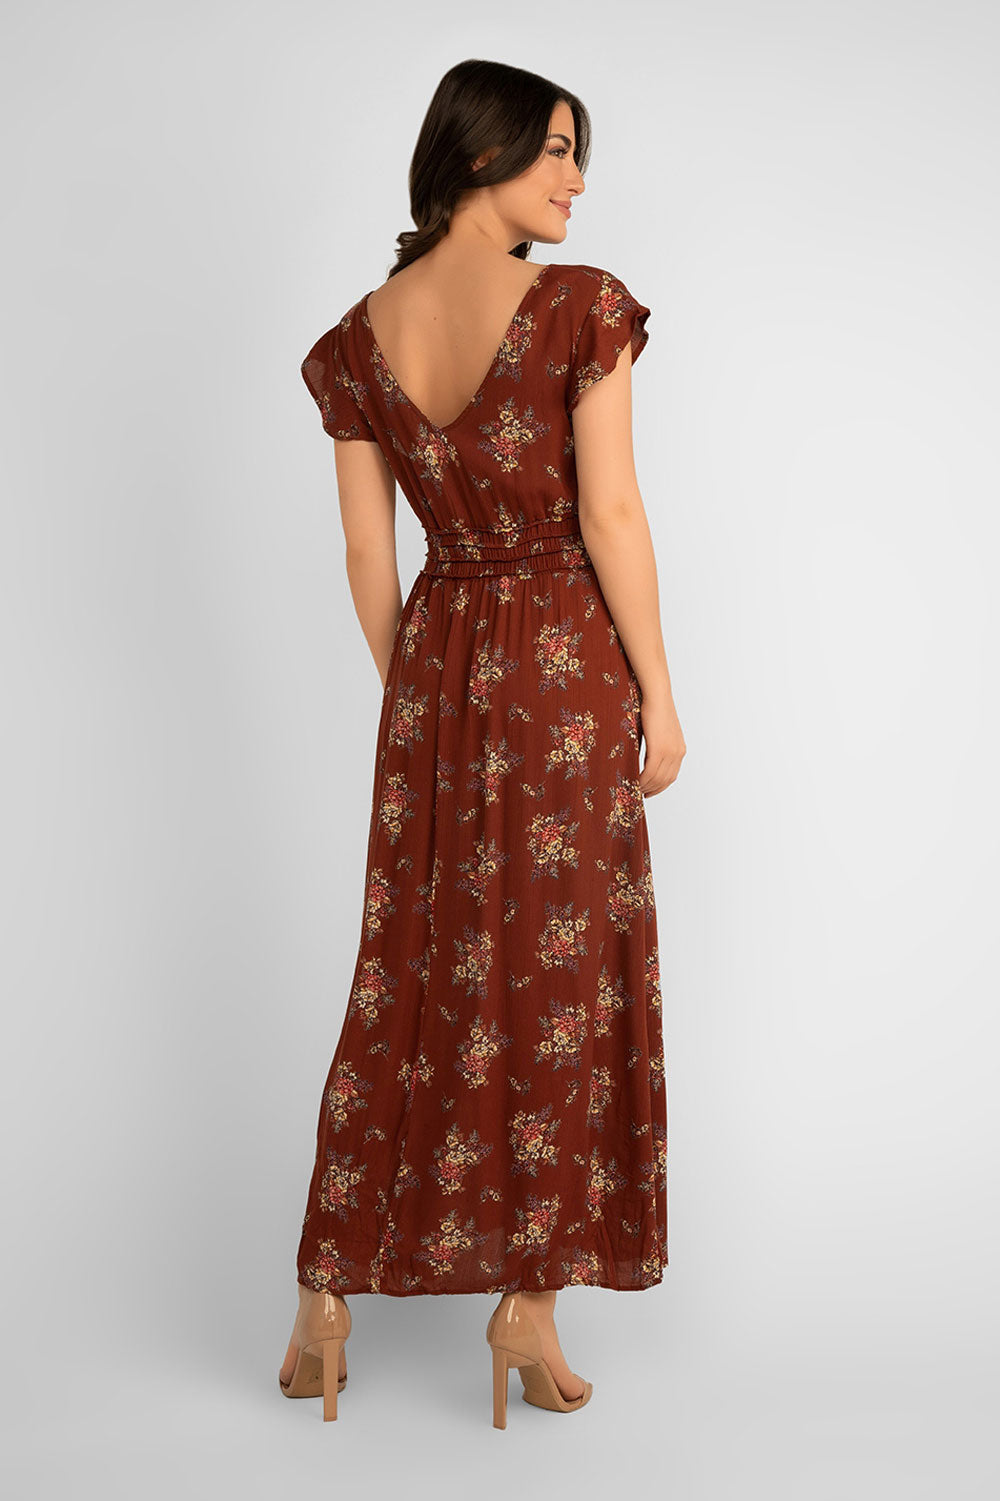 NOSTALGIA - Floral Printed Maxi Dress - Women's Clothing & Accessories 